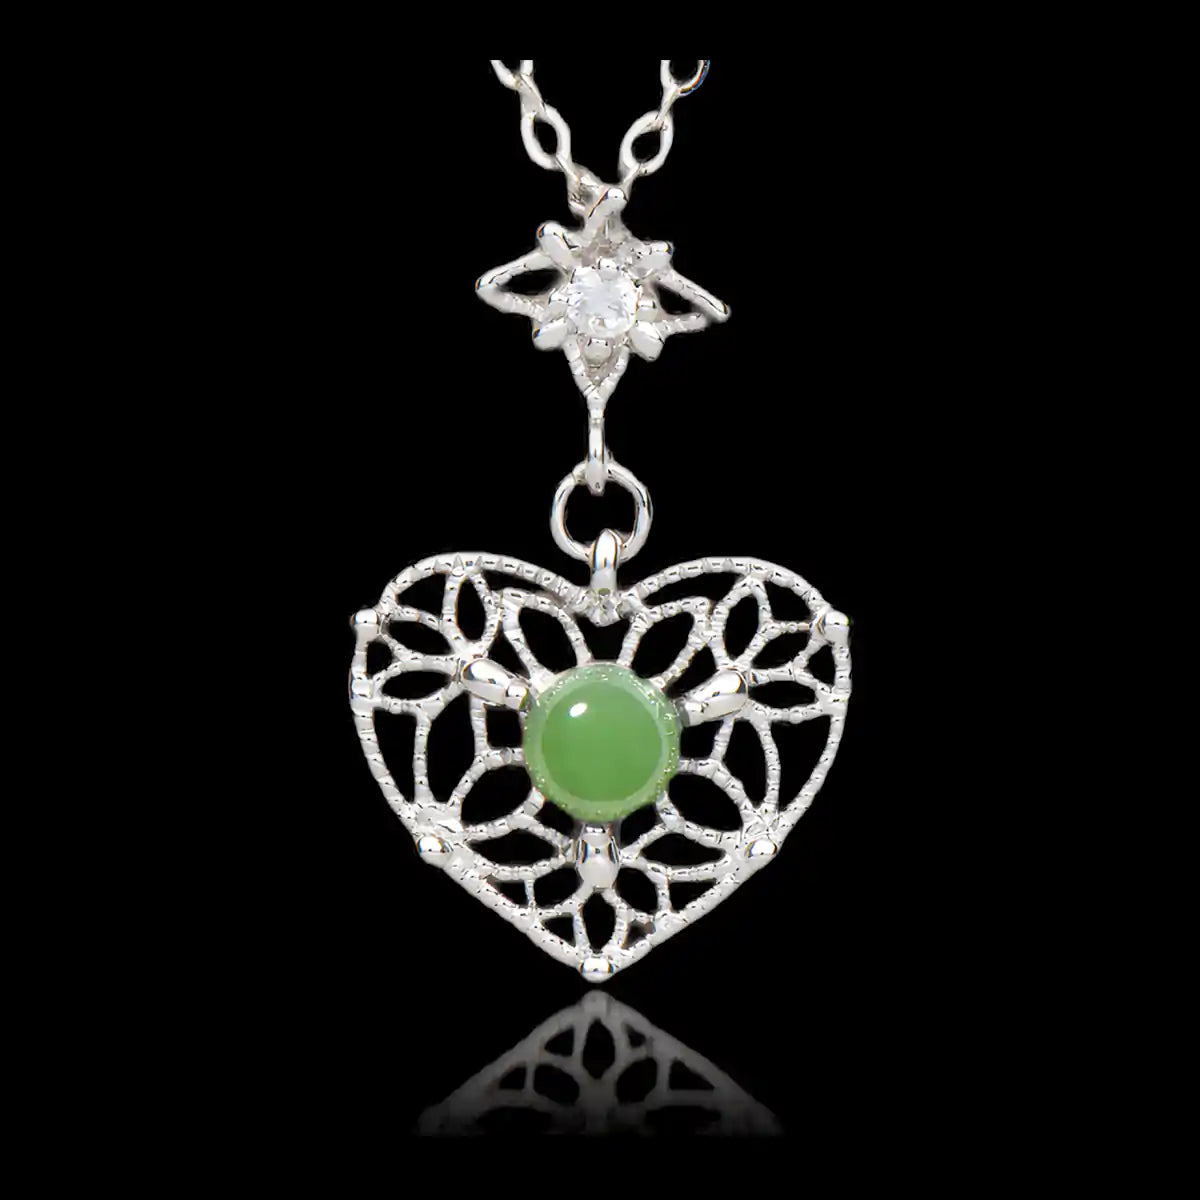 Jade lace heart necklace